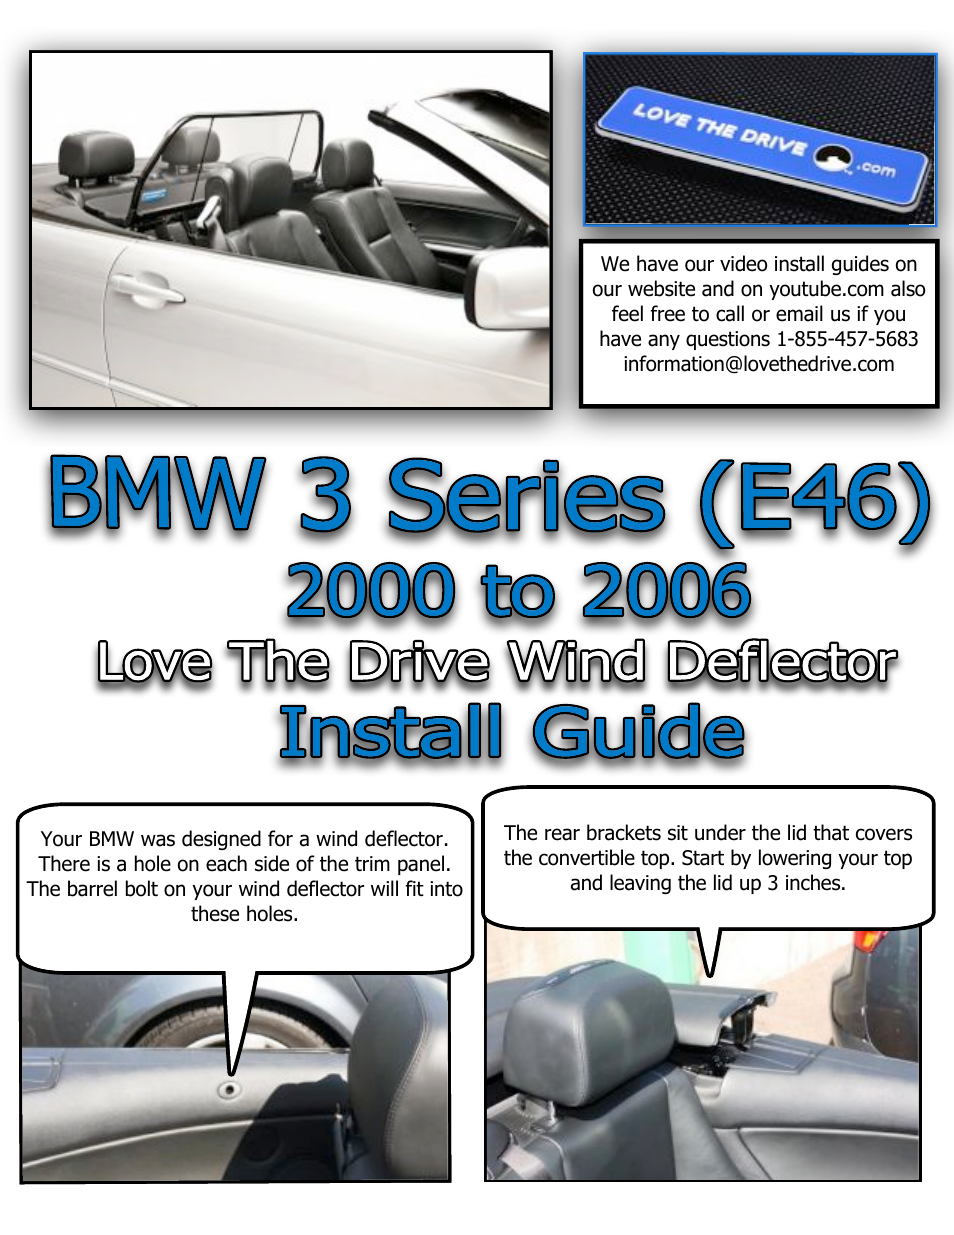 BMW Windstop 3 series (E46) 323, 325, 330, M3 2000 to 2006